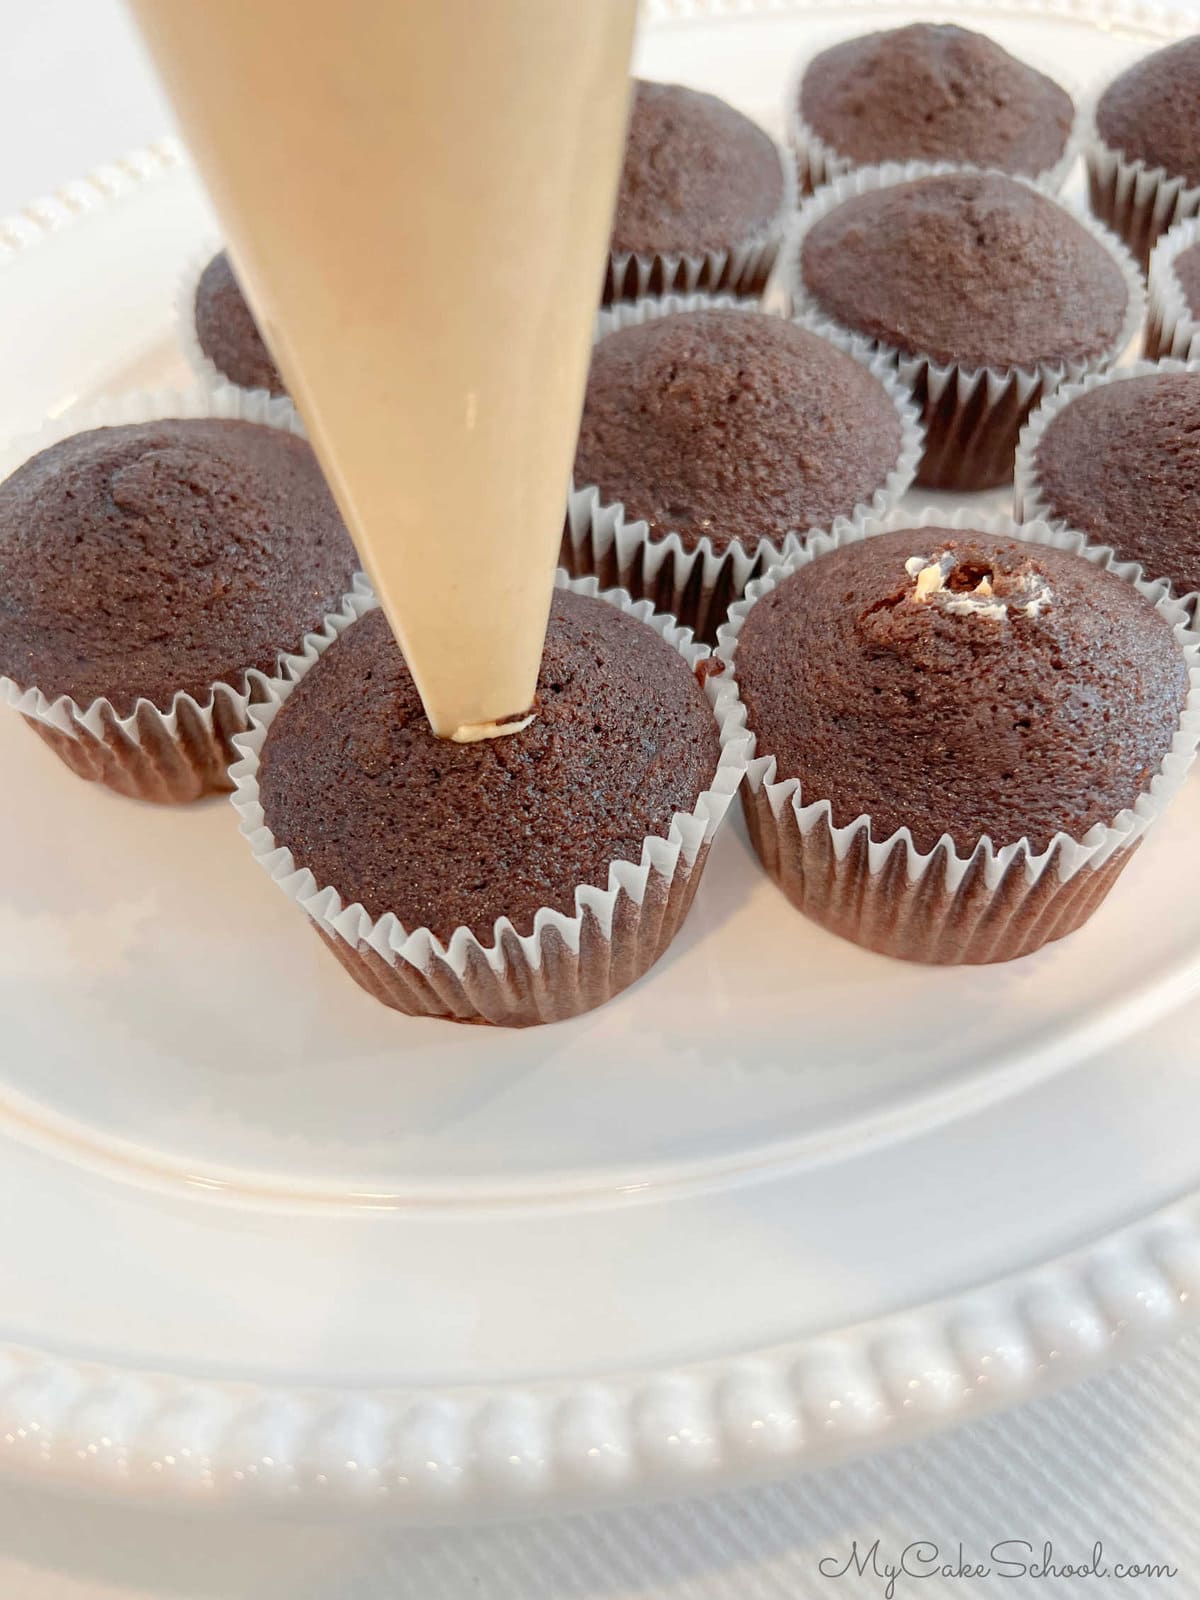 Filling chocolate cupcakes with piping bag of peanut butter frosting